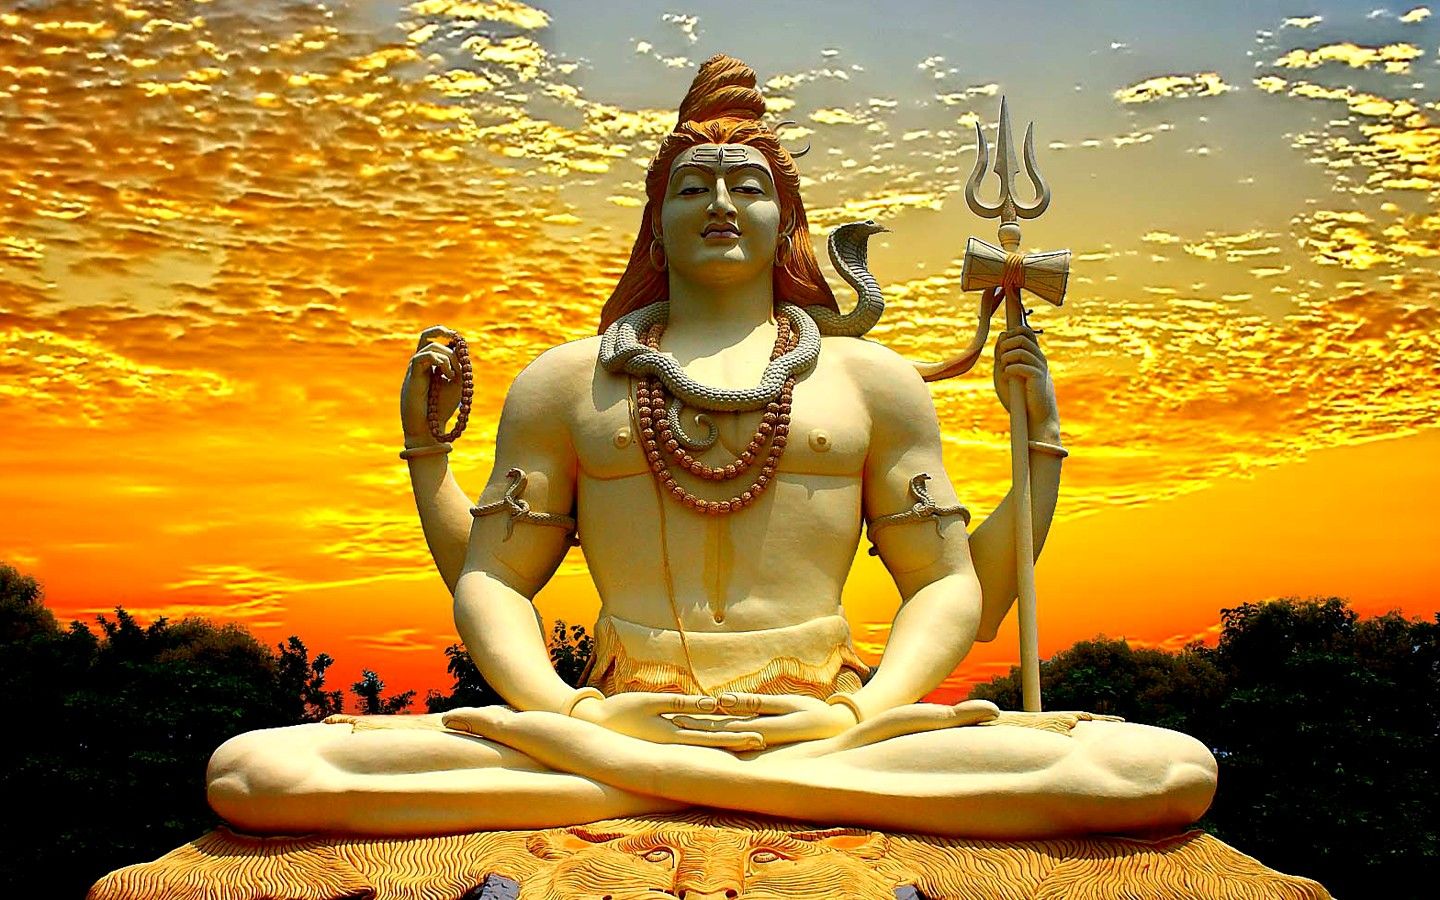 download full hd images of lord shiva